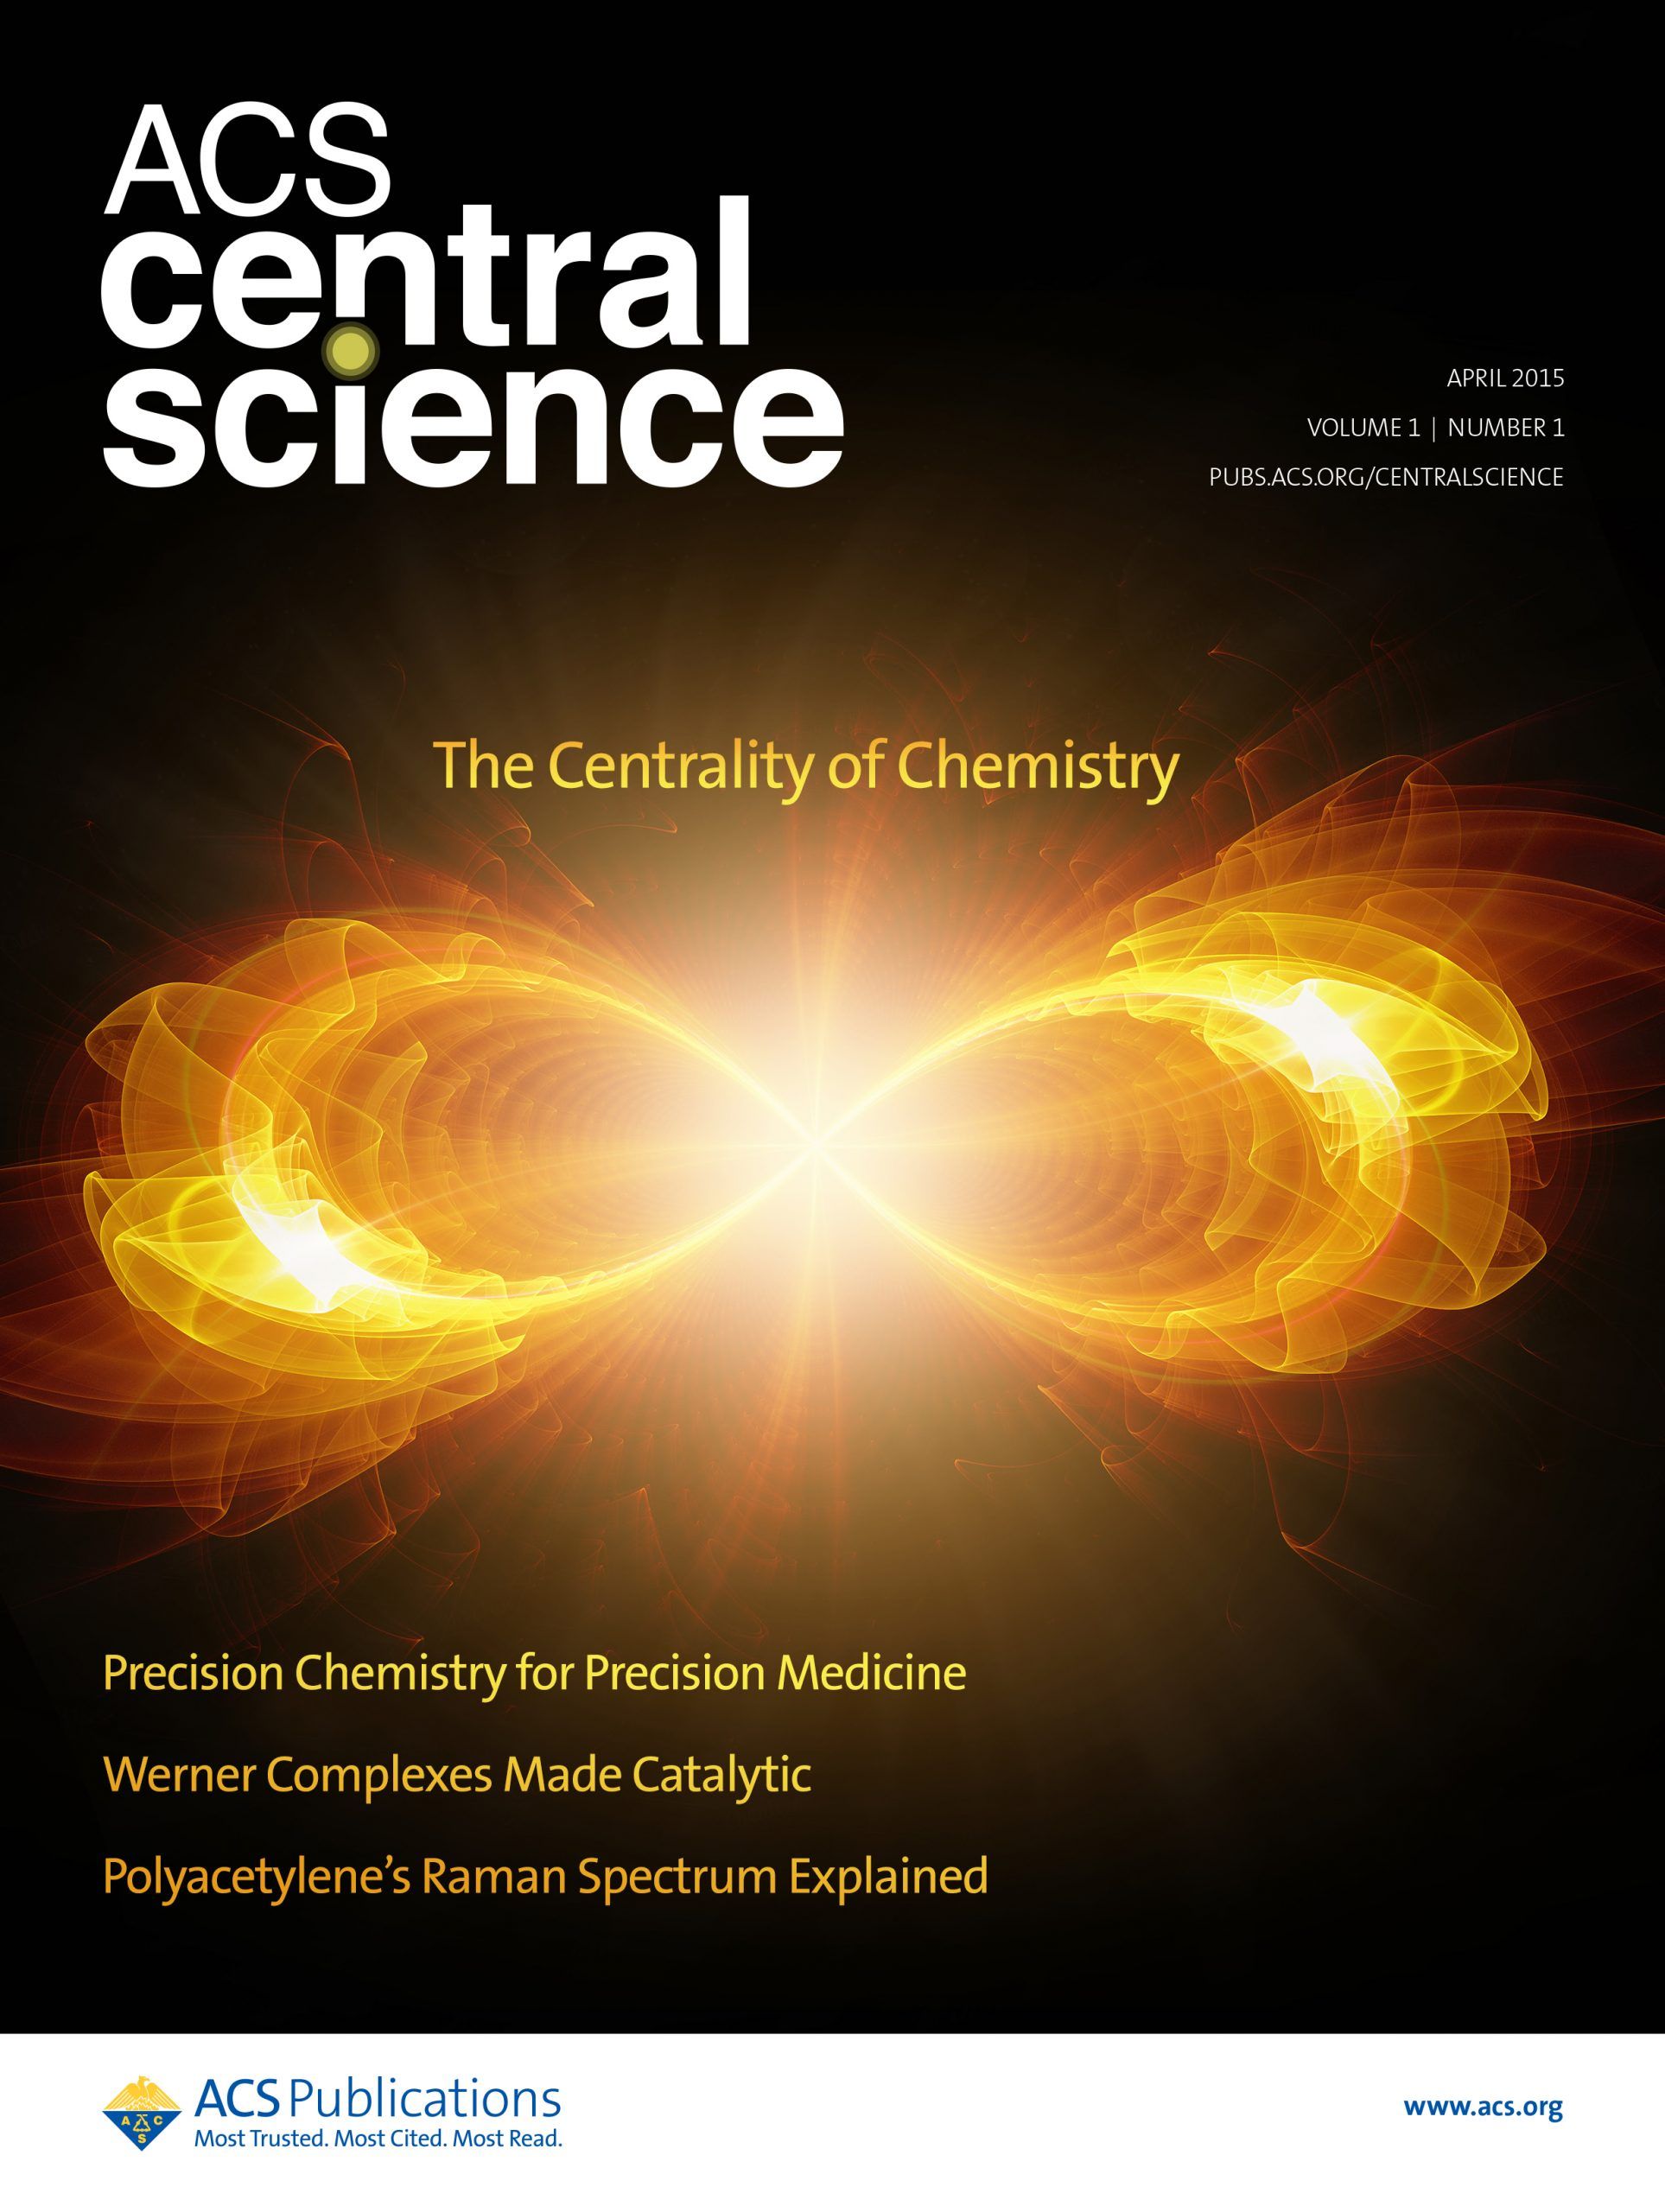 ACS Central Science - Inaugural Cover